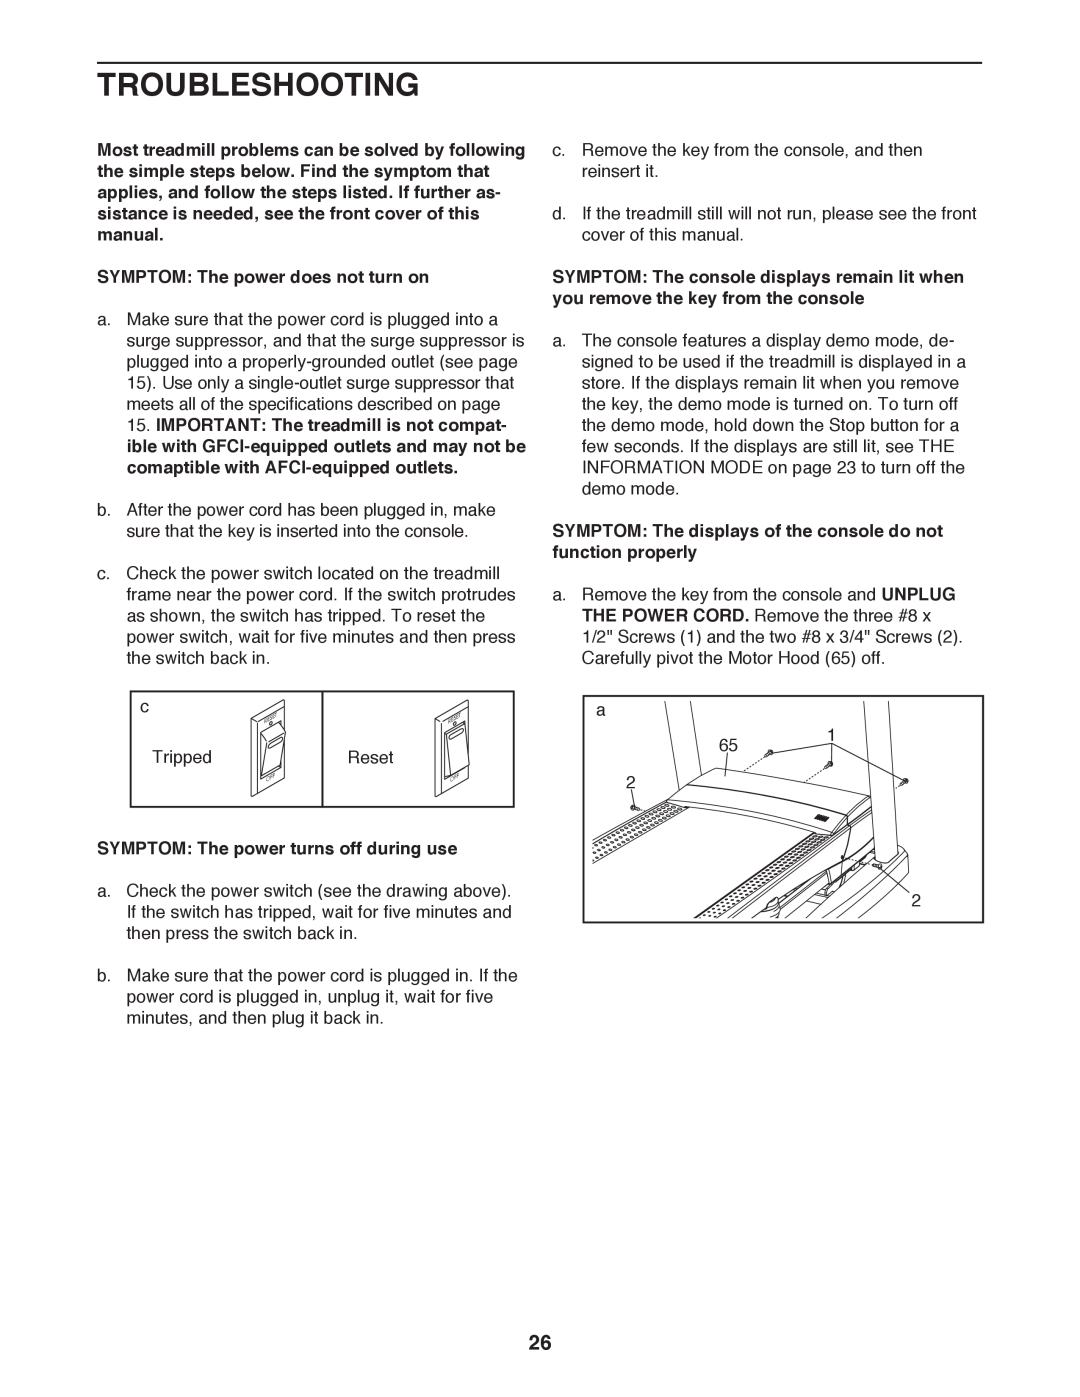 ProForm 795 user manual Troubleshooting, SYMPTOM The power does not turn on, SYMPTOM The power turns off during use 